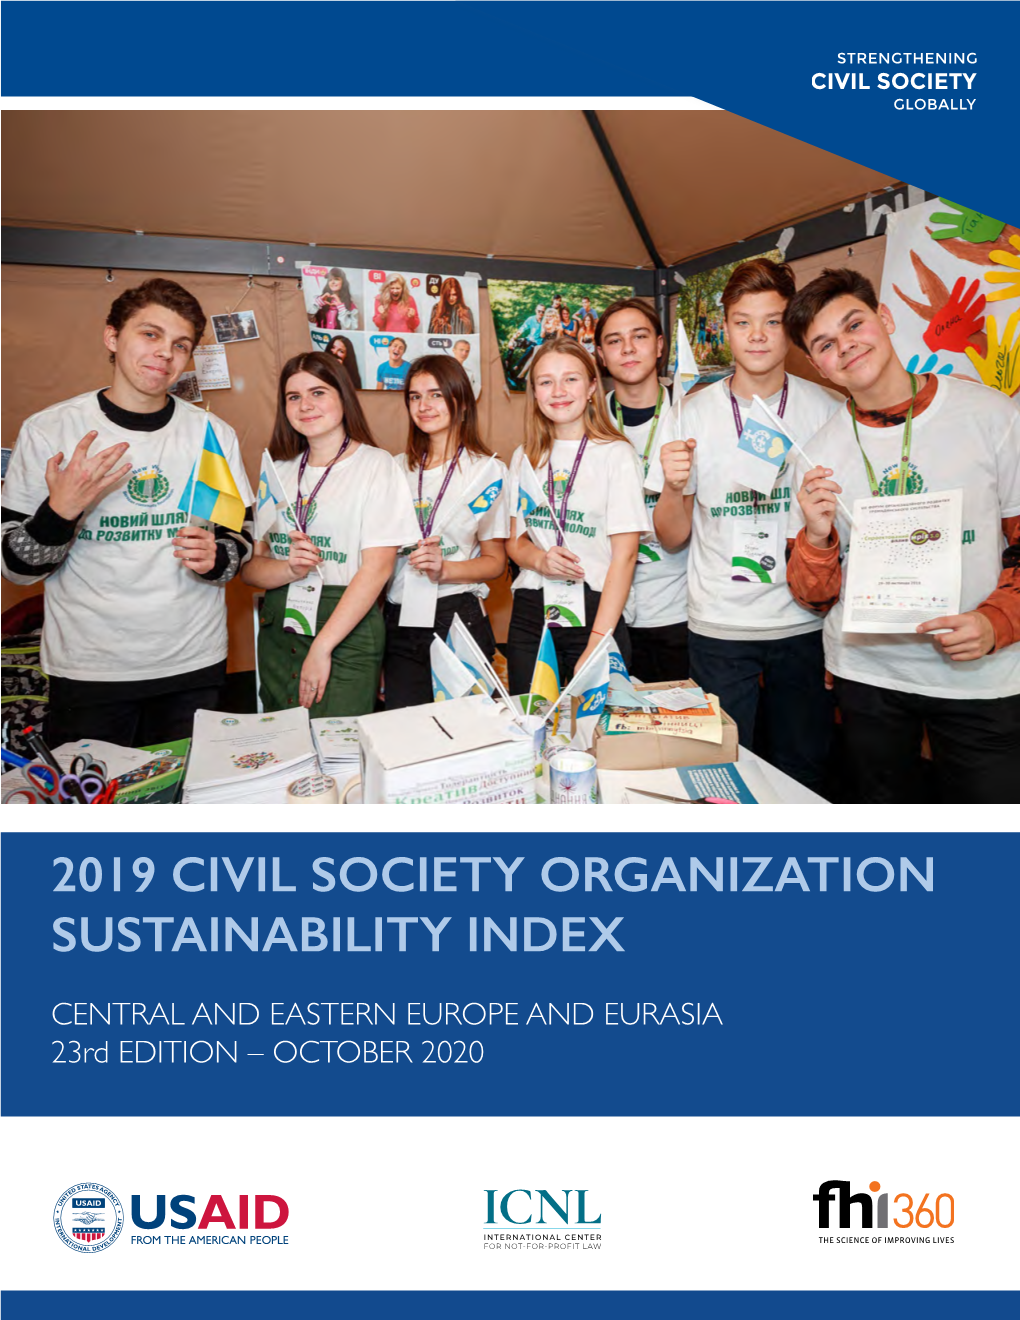 2019 Civil Society Organization Sustainability Index for Central and Eastern Europe and Eurasia